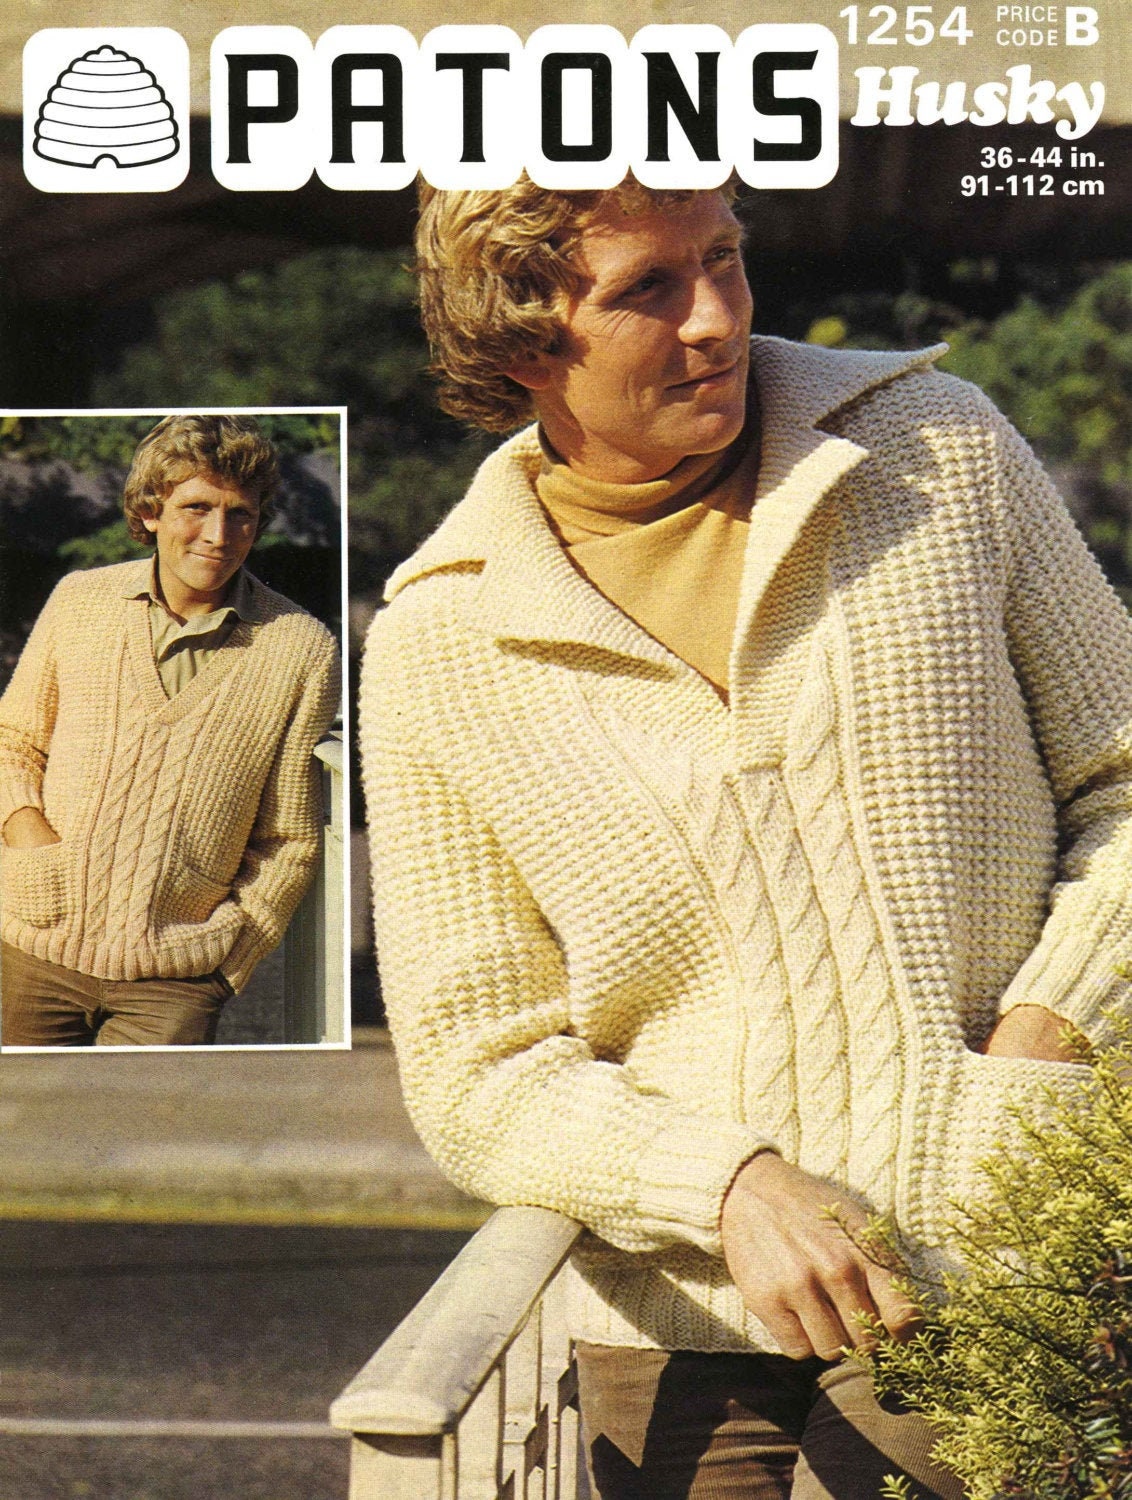 Mens V-neck Sweater / Jumper in 2 Styles (With or Without Collar), 36"-44" Chest, Chunky, 70s Knitting Pattern, Patons 1254